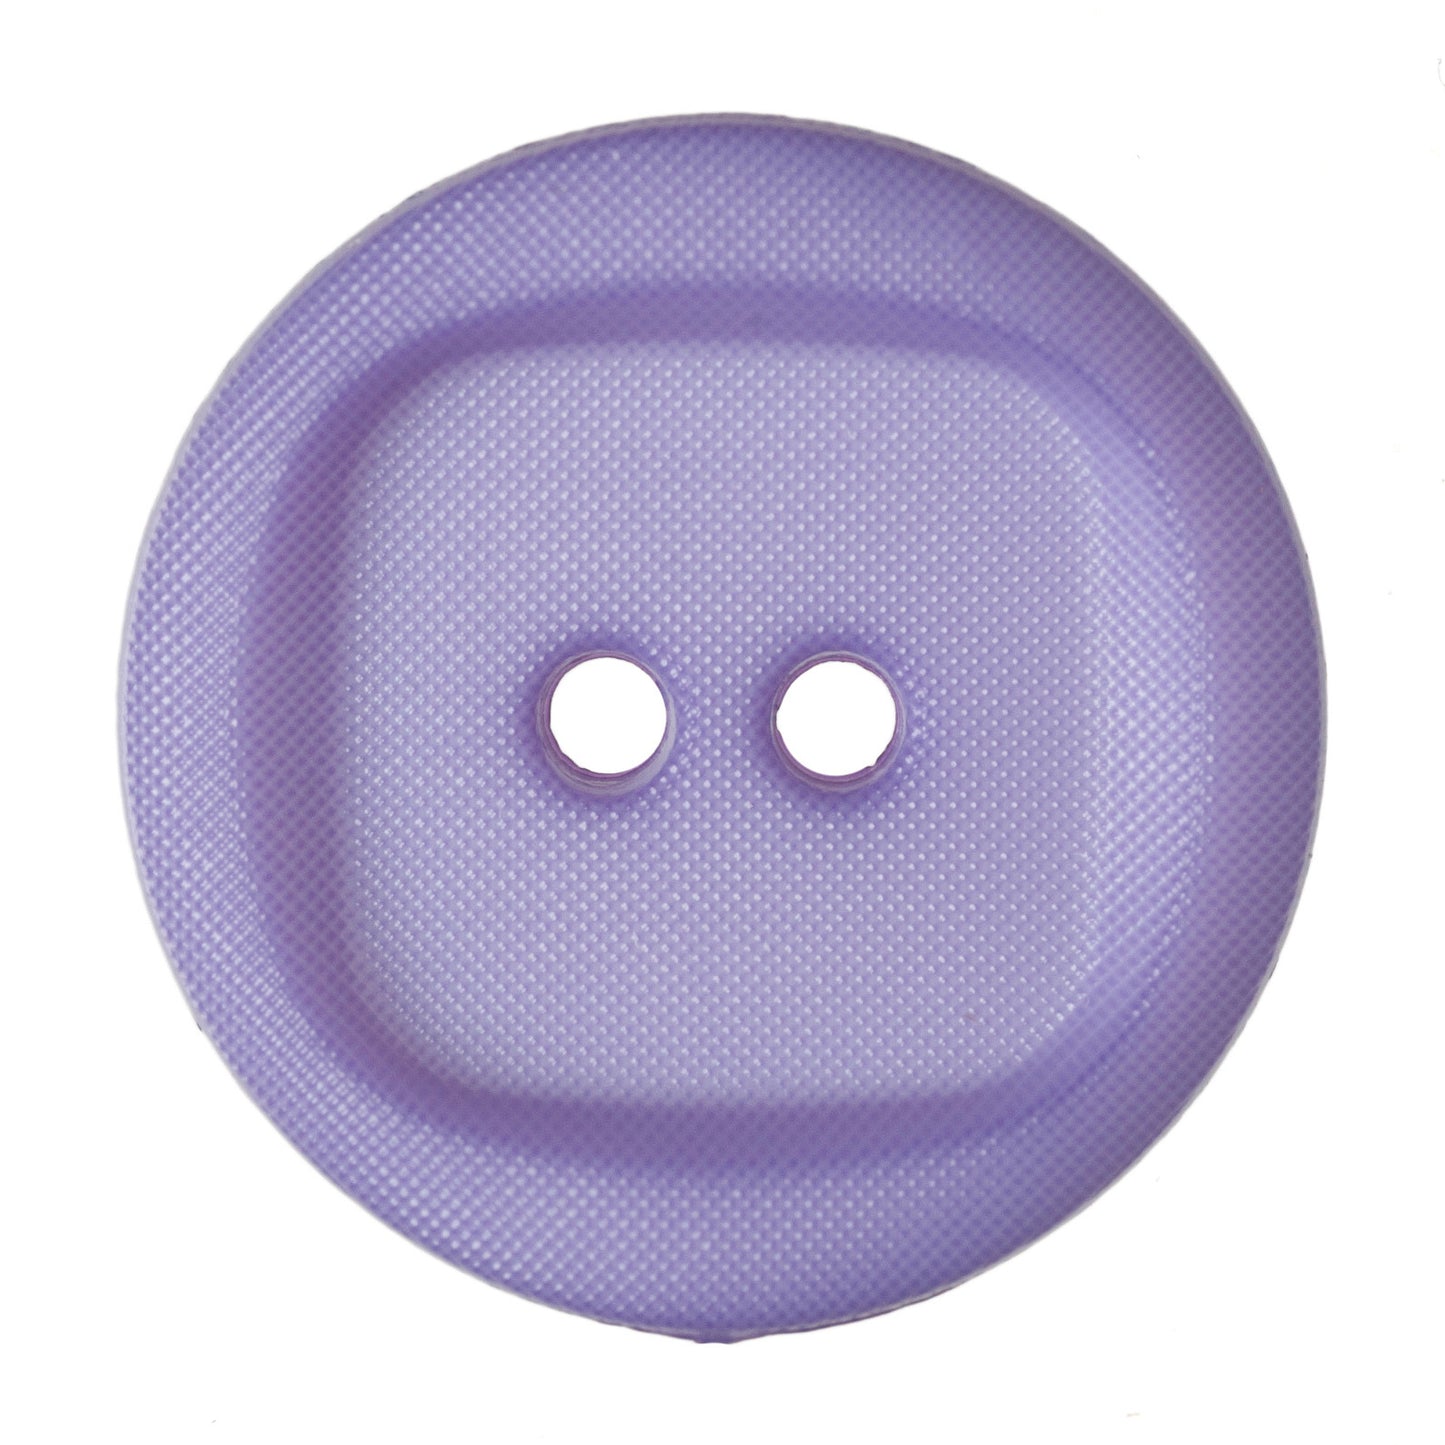 2 Hole Wavy with Square Insert Button - 20mm - Purple